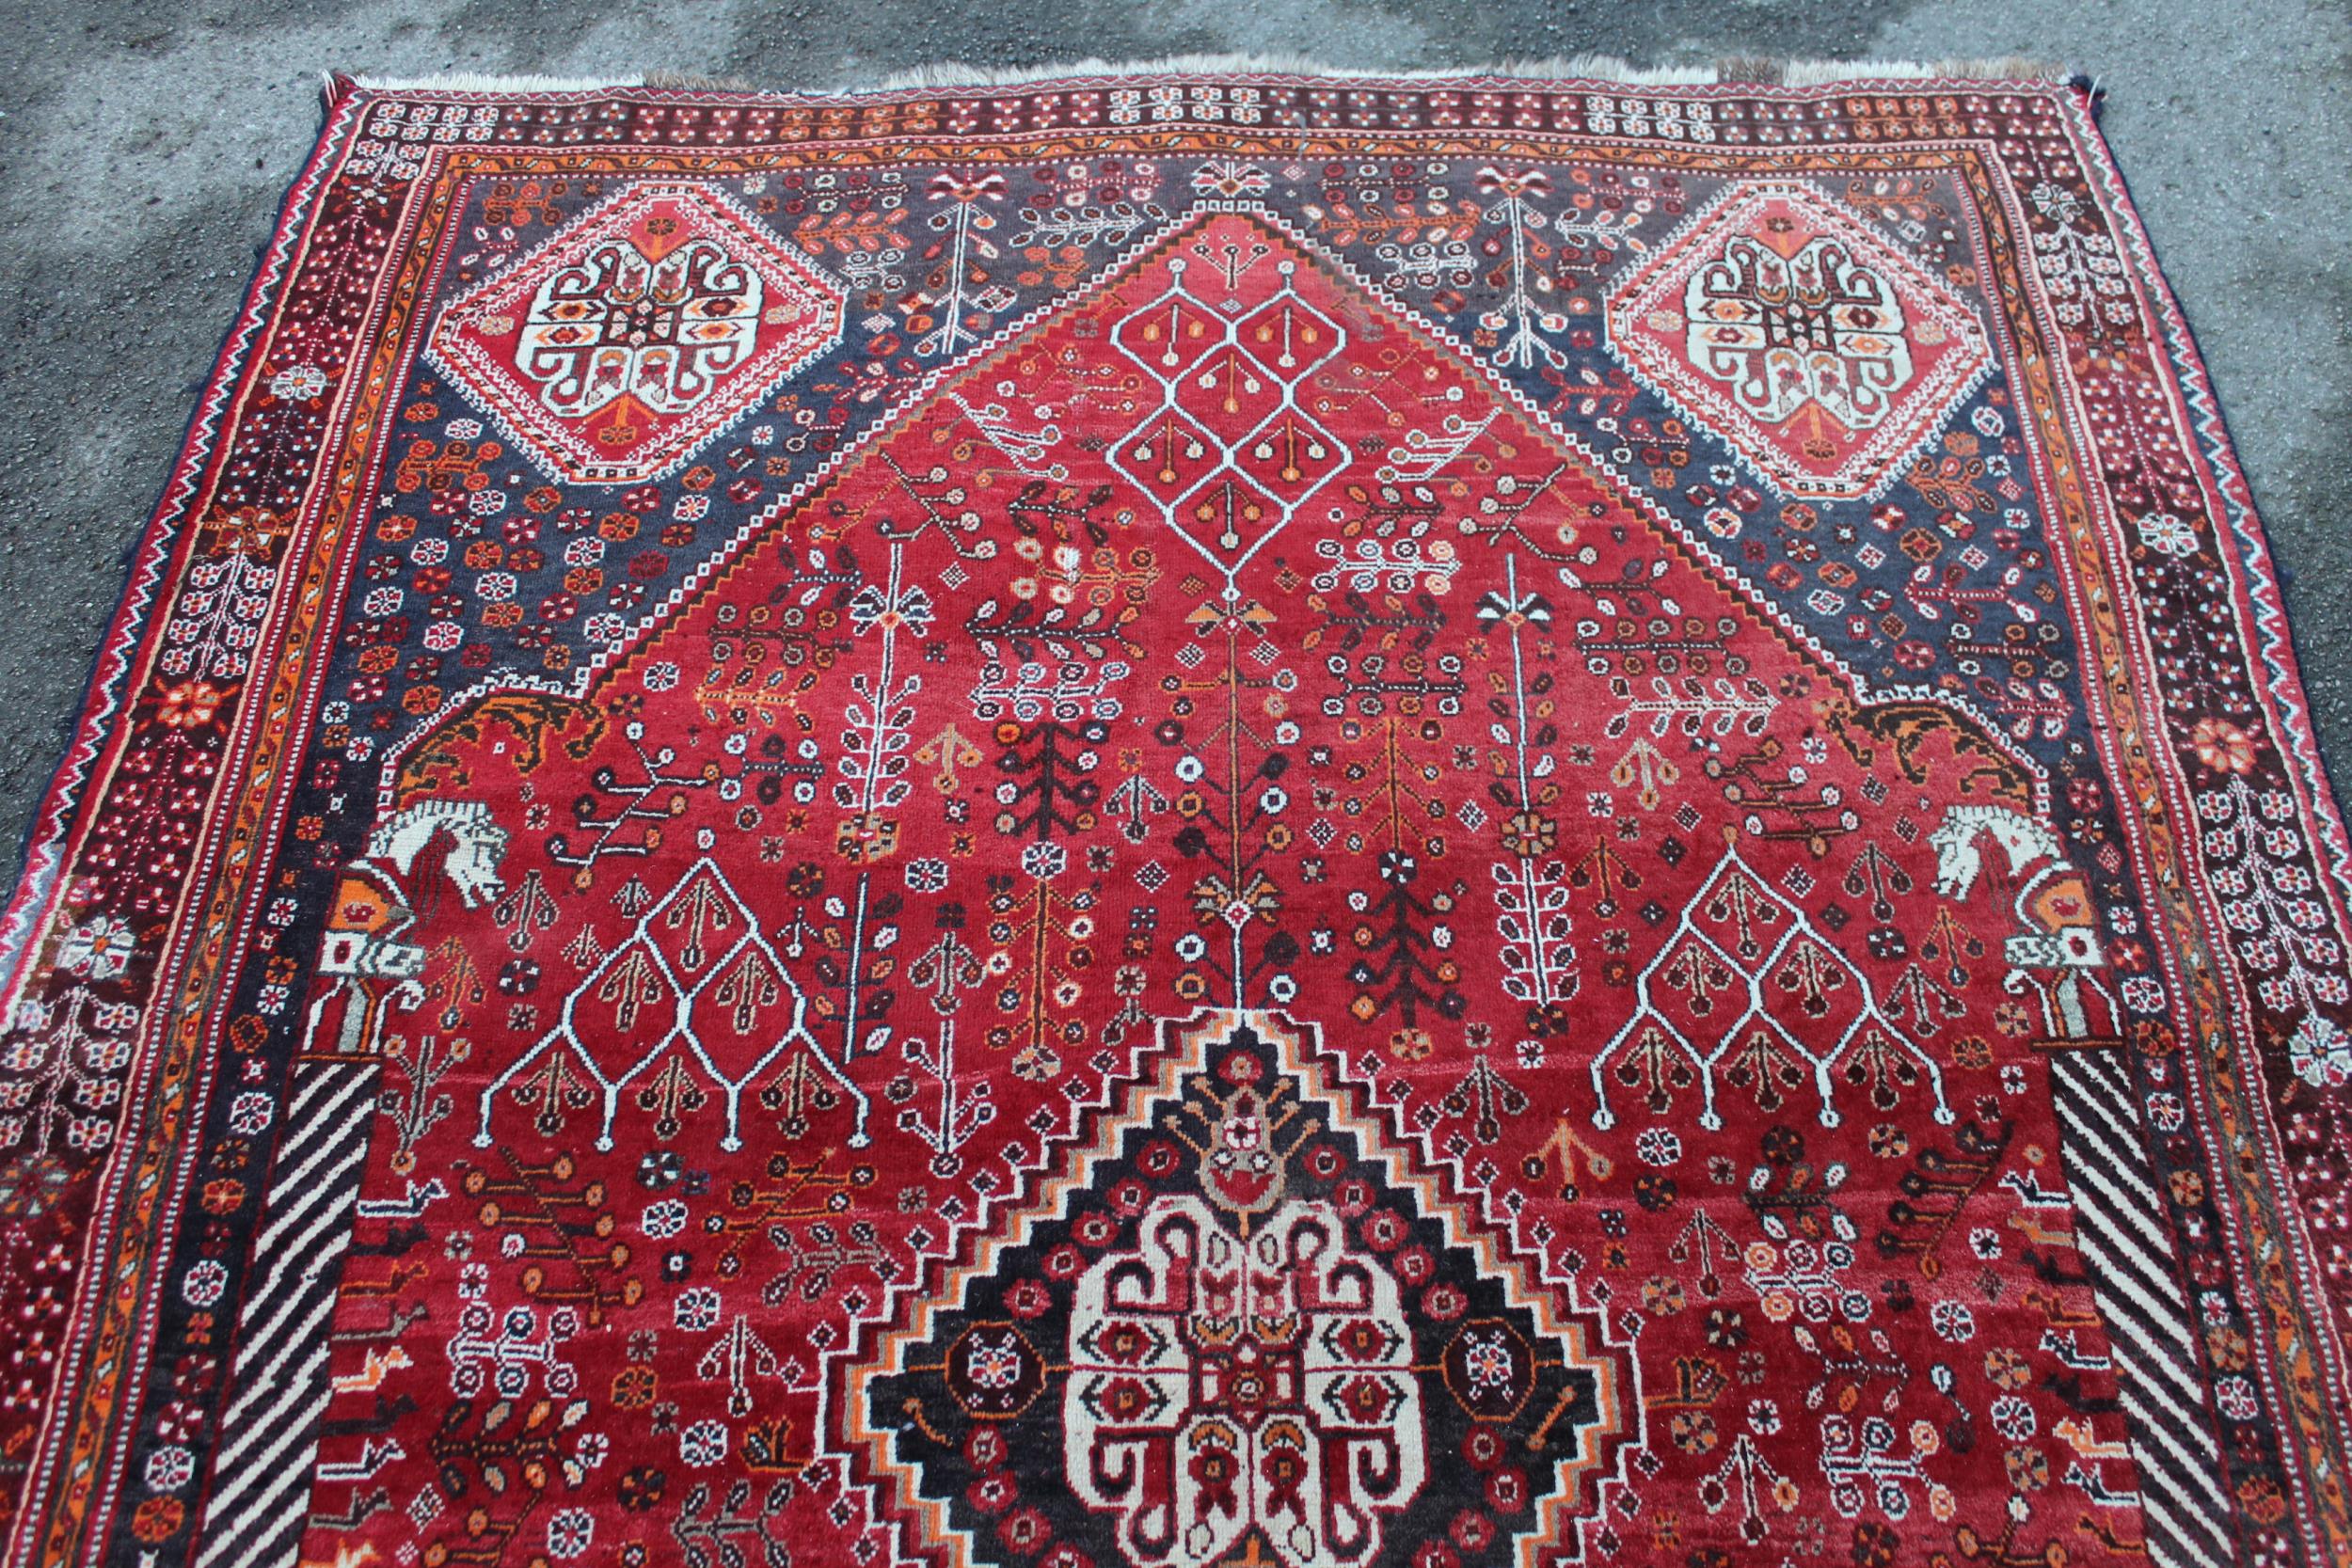 Qashqai rug with central medallion design on red and blue ground with borders, 96ins x 64ins Good - Image 3 of 4